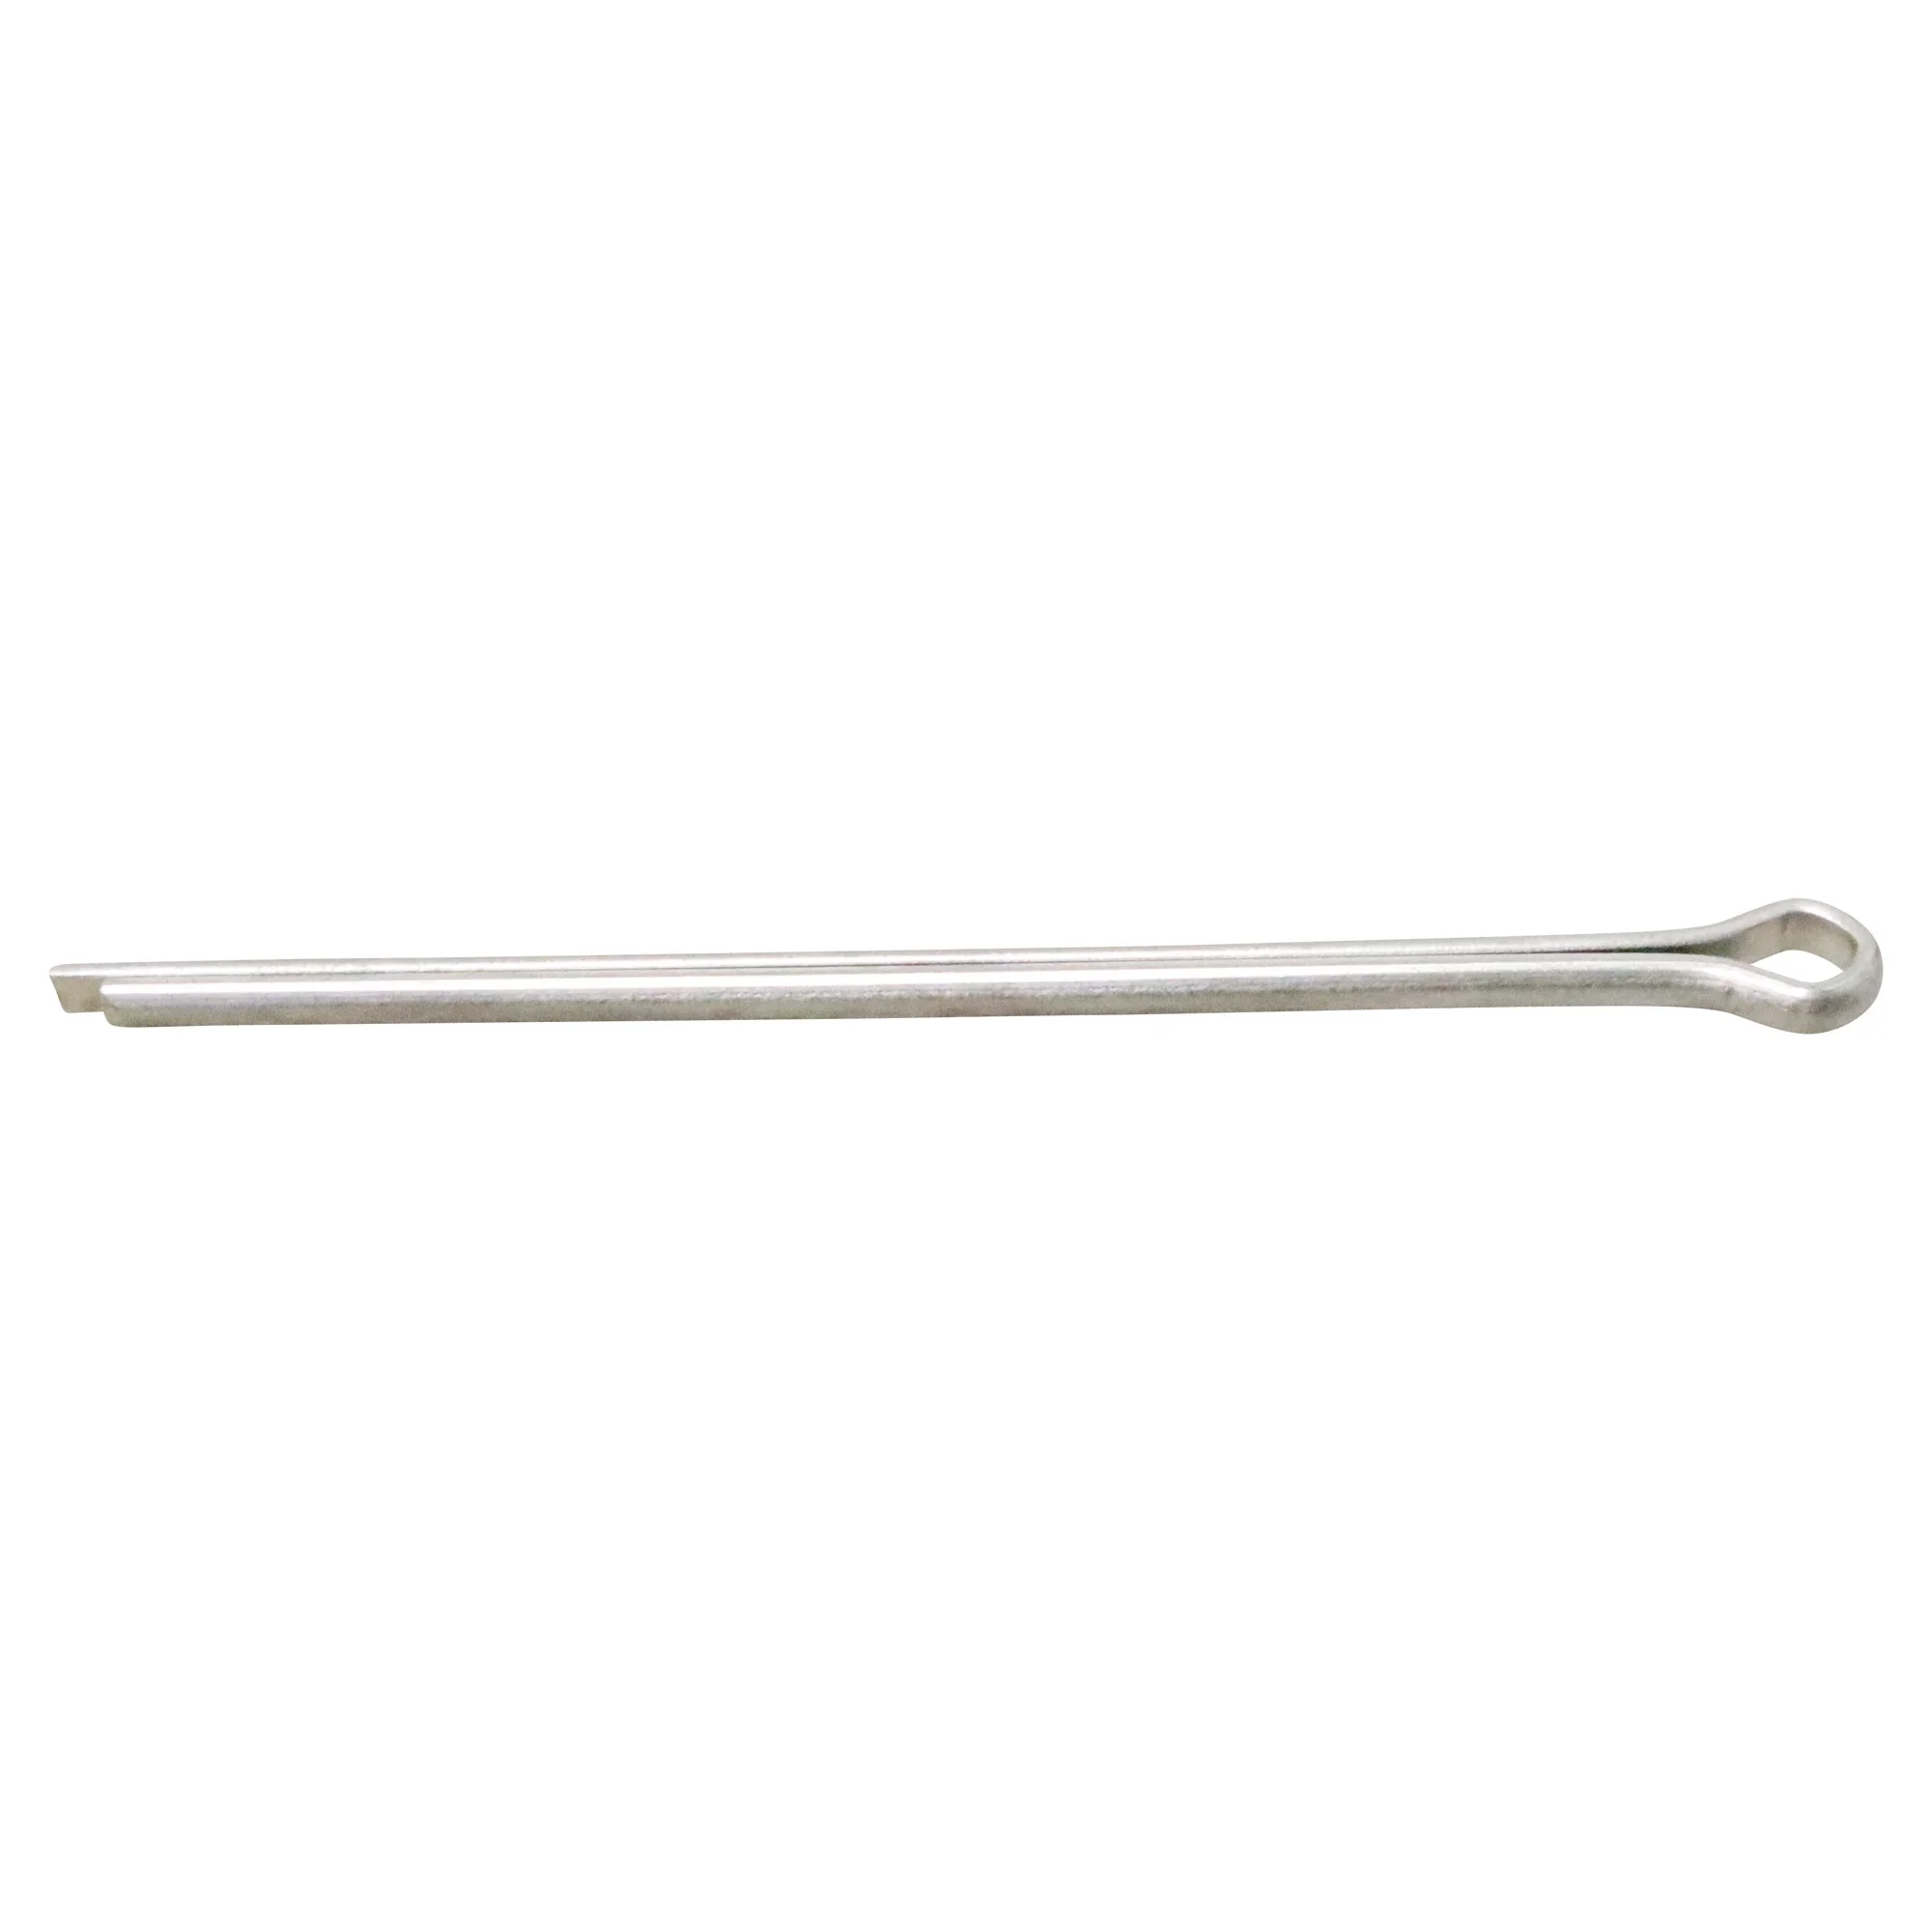 Galbreath™ Cotter Pin